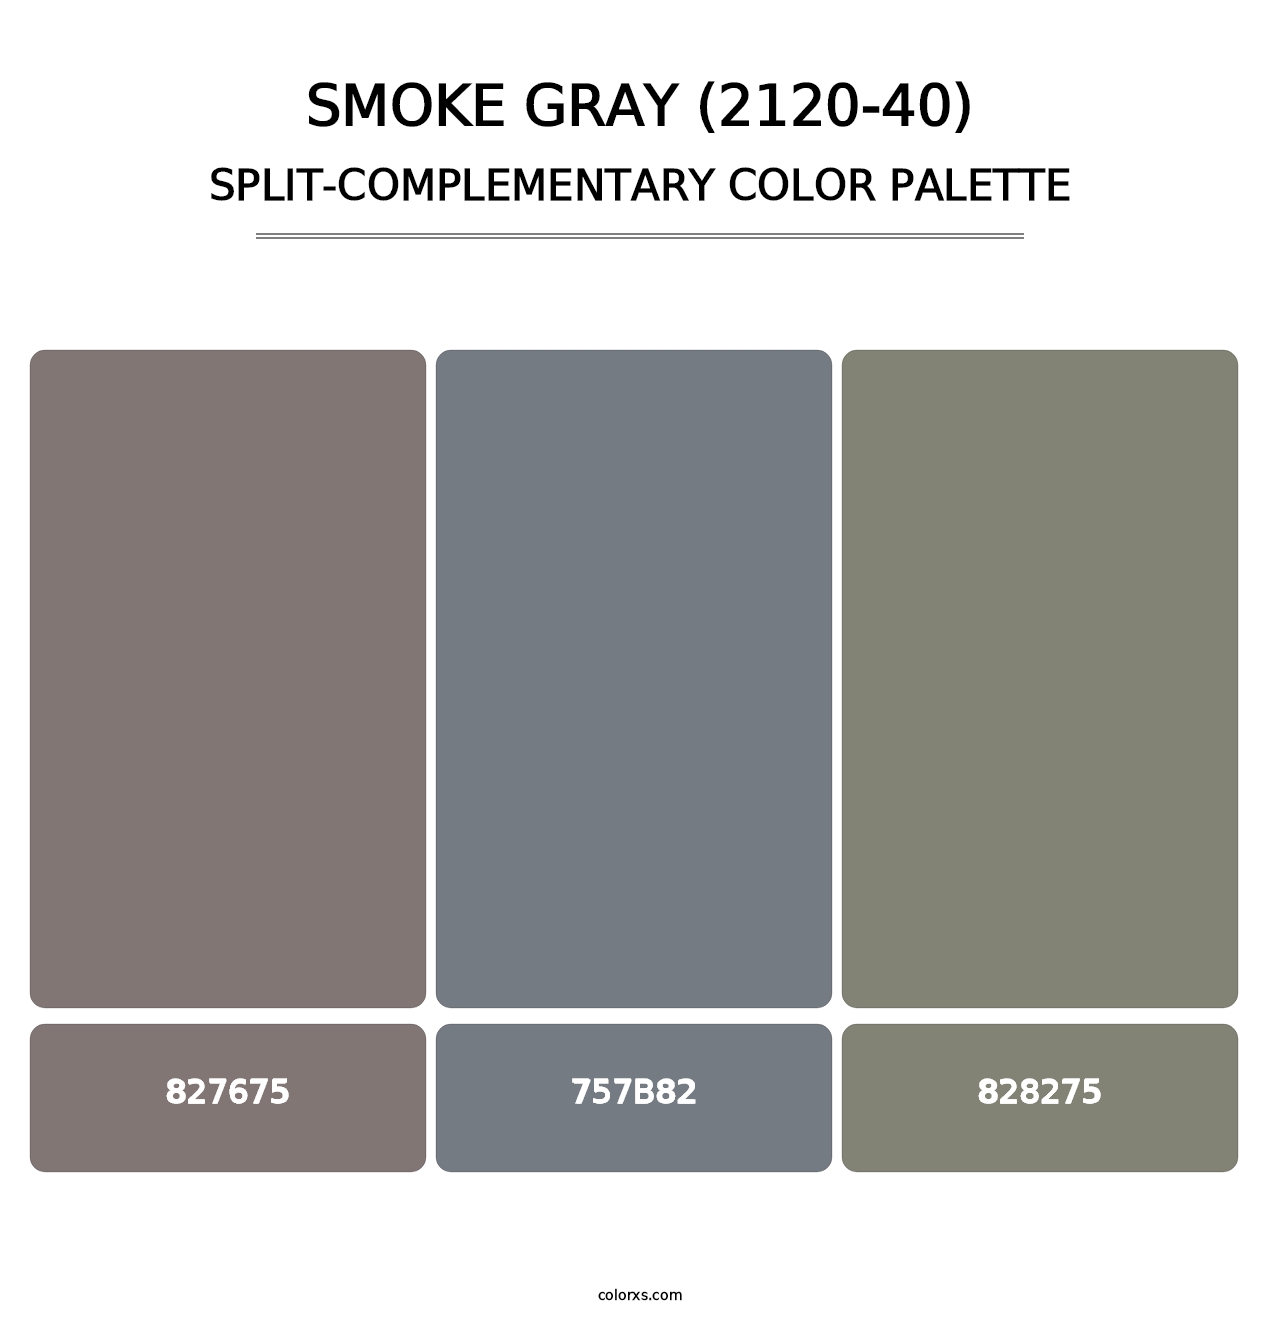 Smoke Gray (2120-40) - Split-Complementary Color Palette